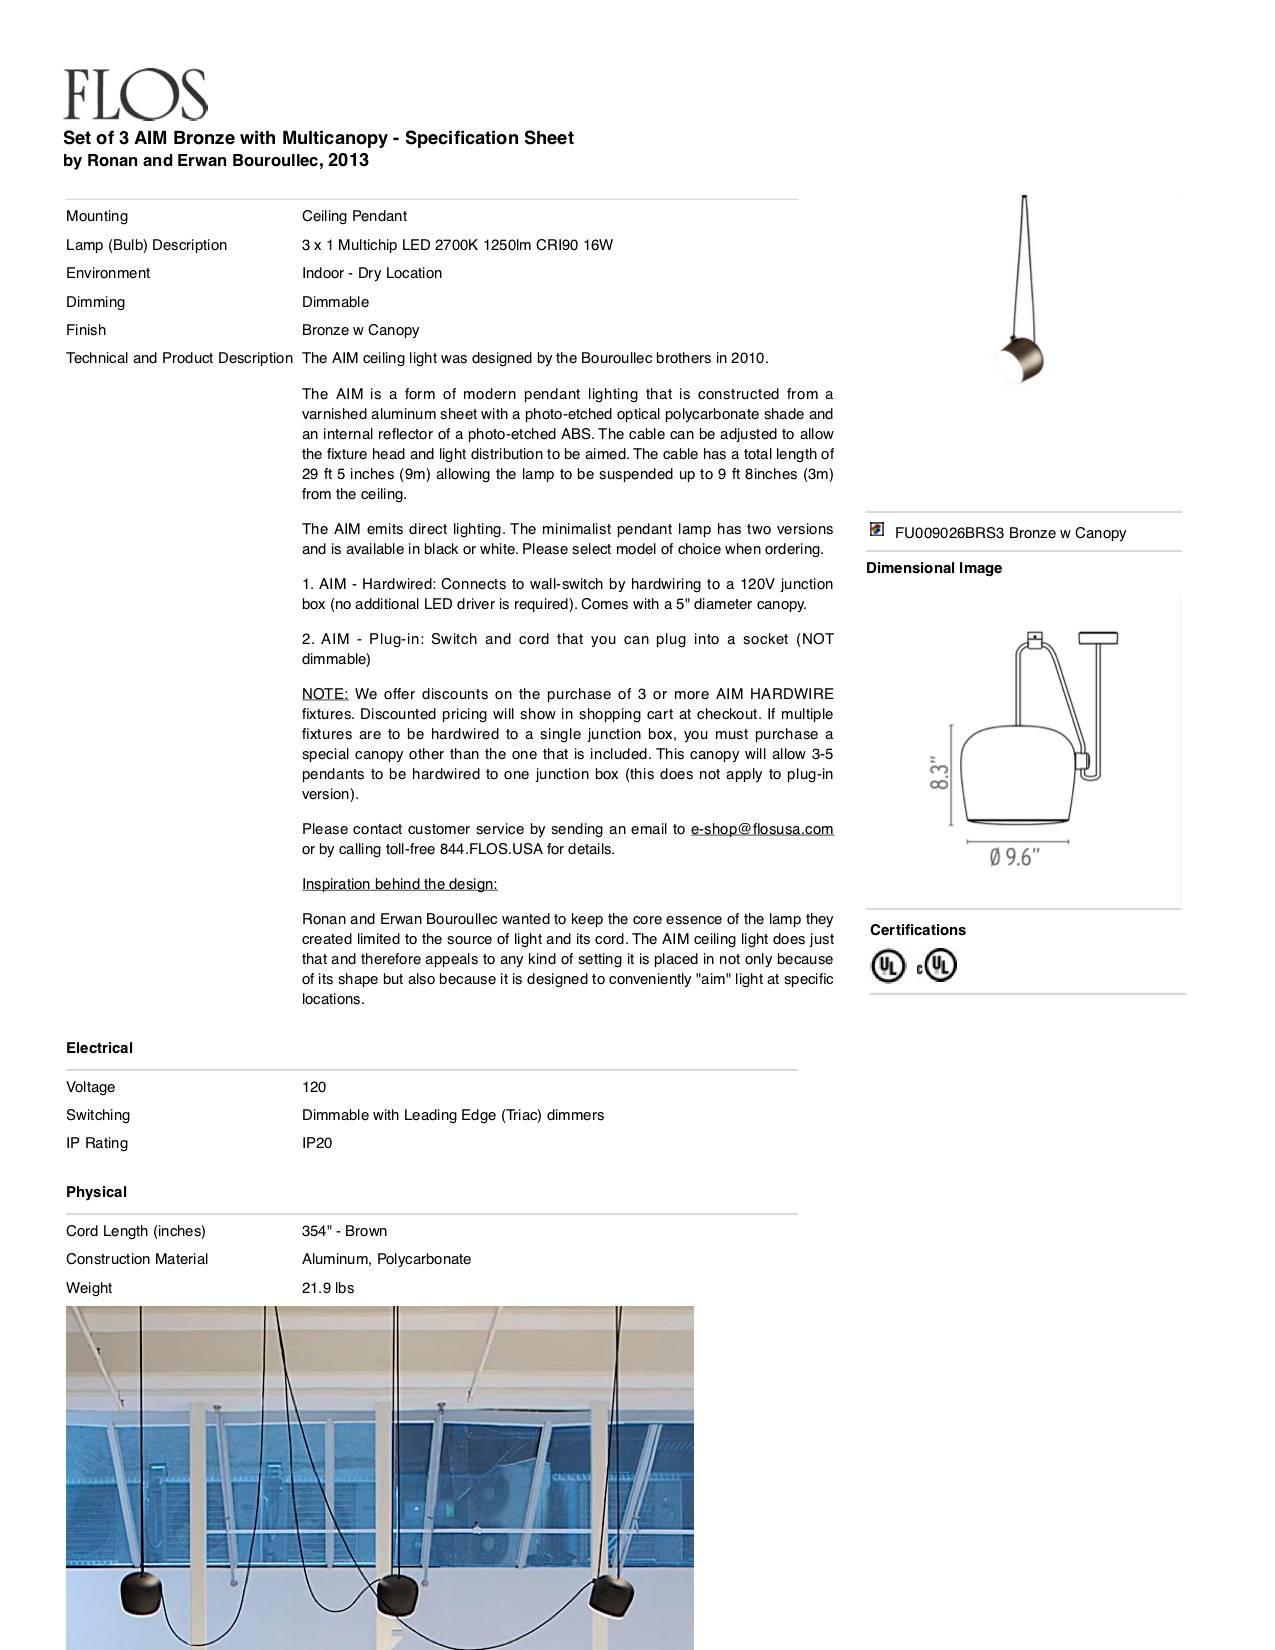 Contemporary Bouroullec Modern Bronze Pendant Aim Three Light Set & Canopy for FLOS, in stock